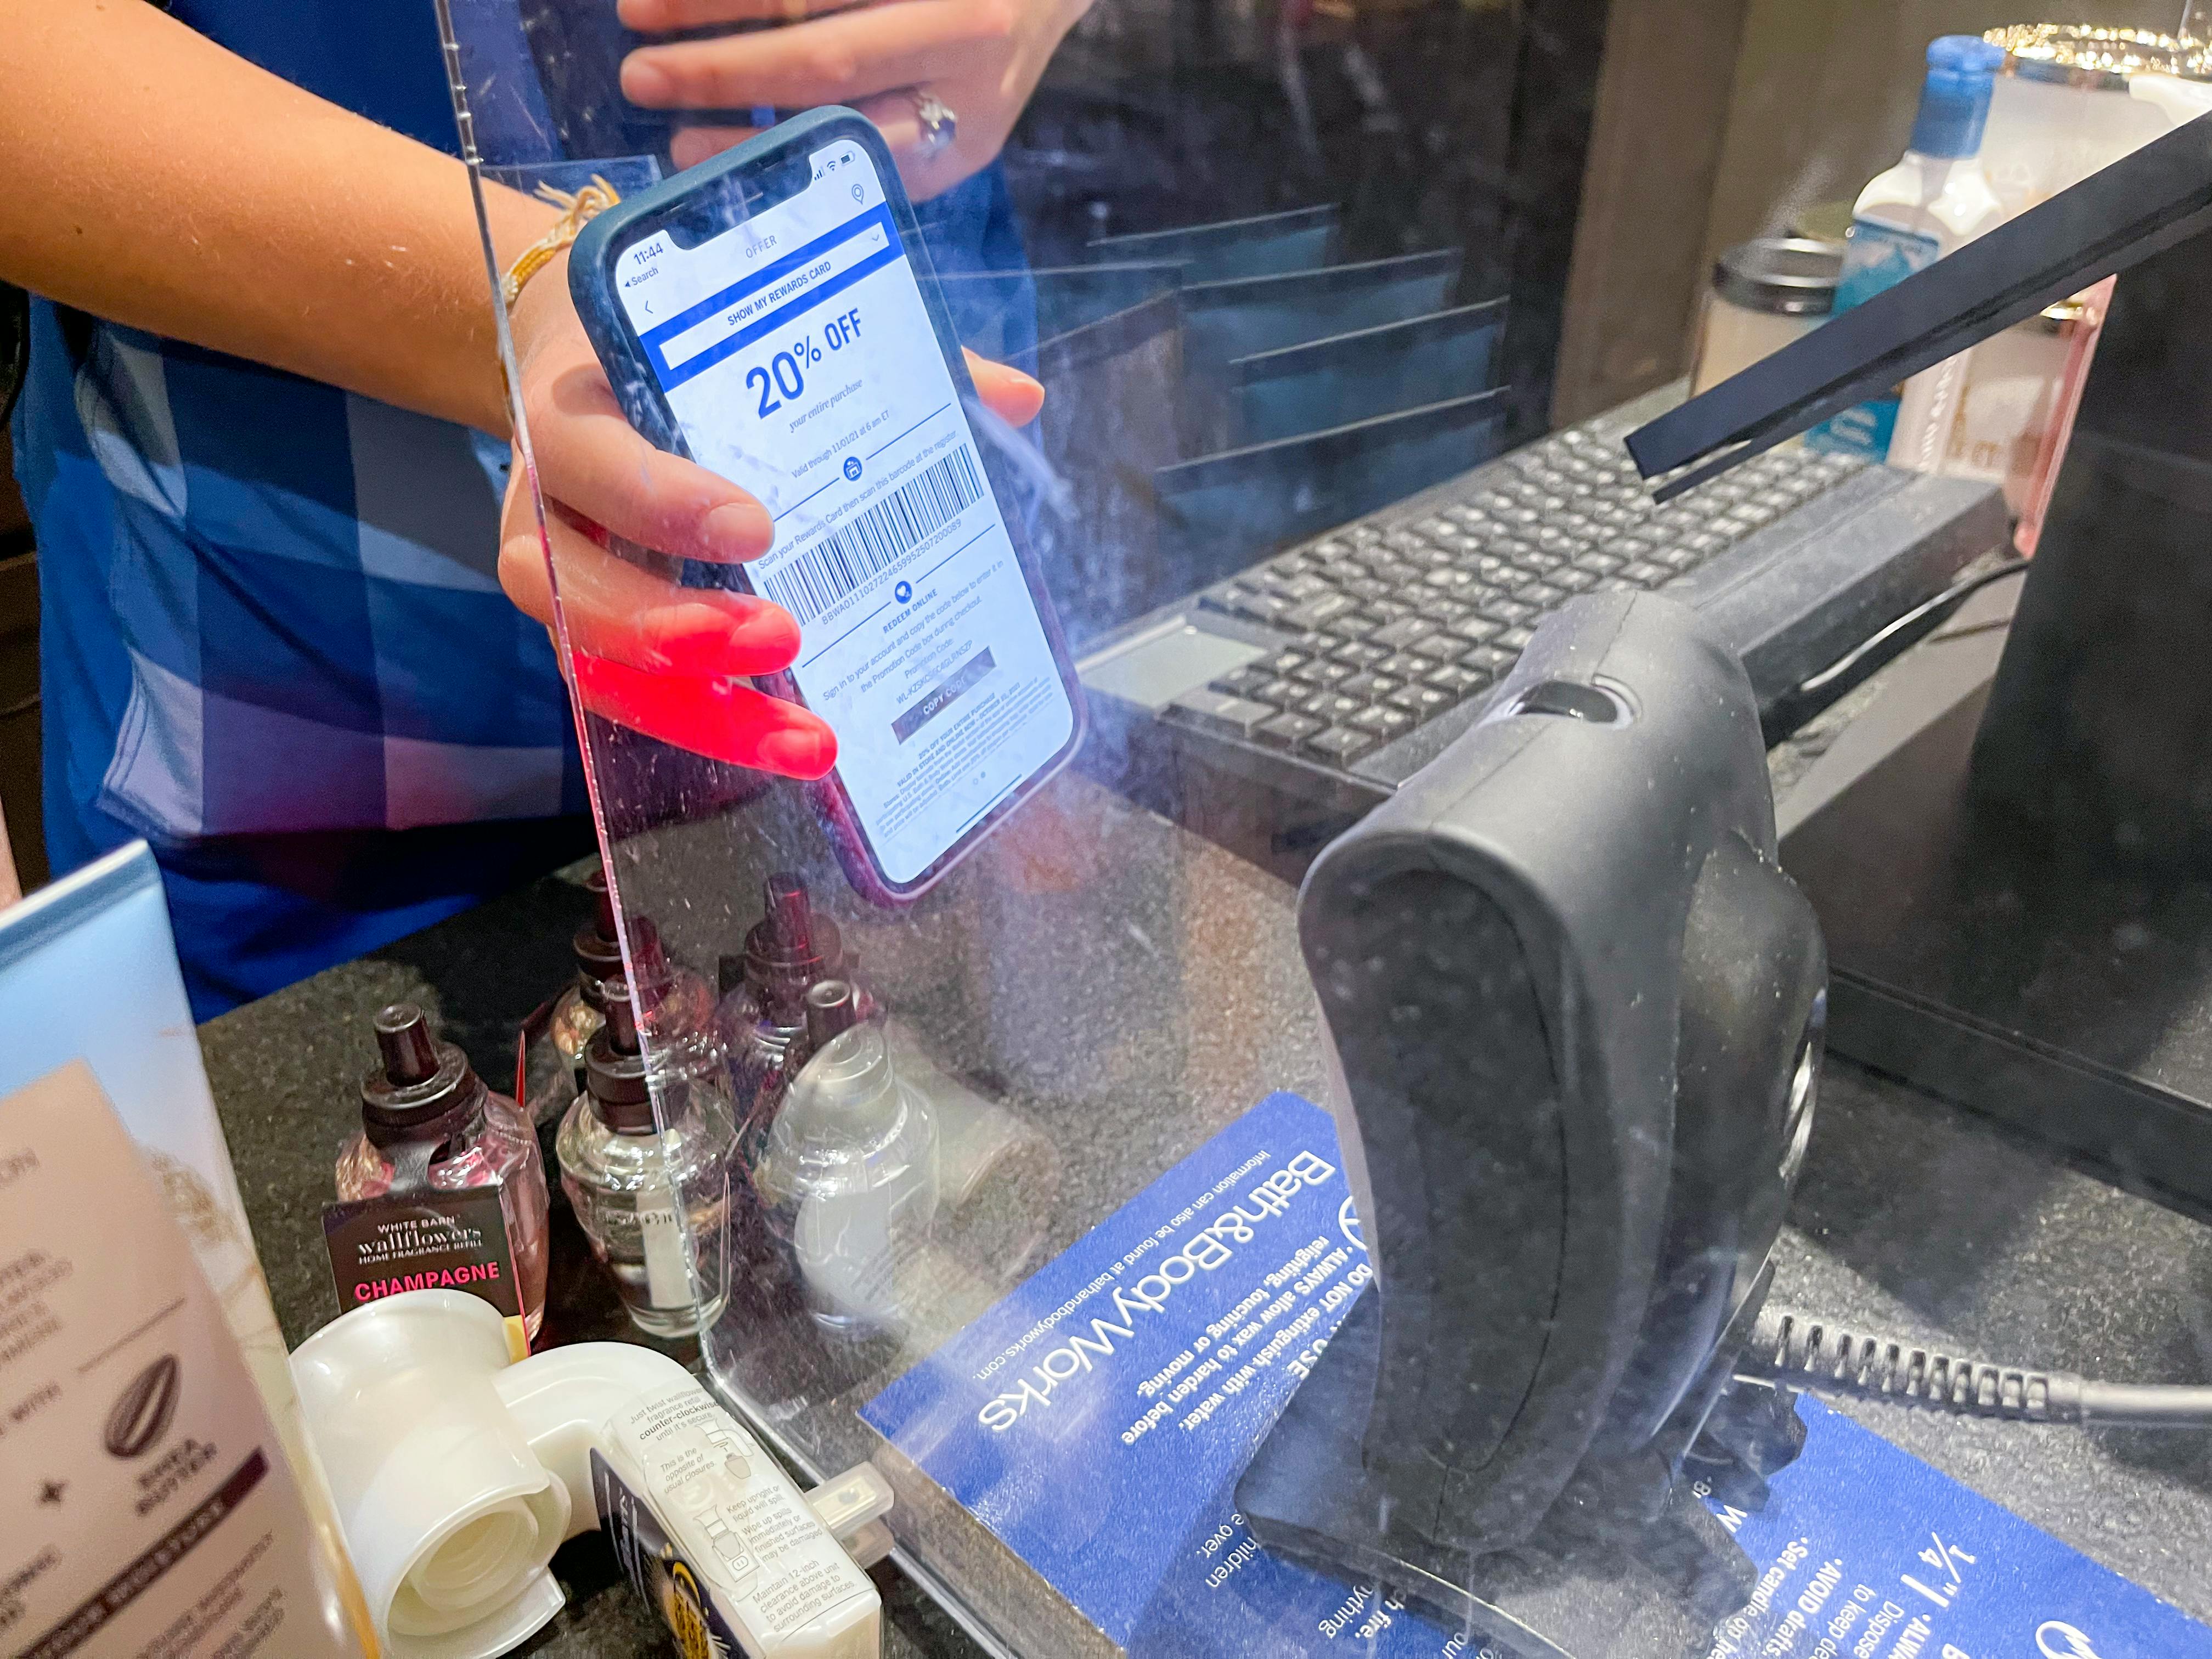 a cashier at Bath and body Works scanning a coupon on the app.